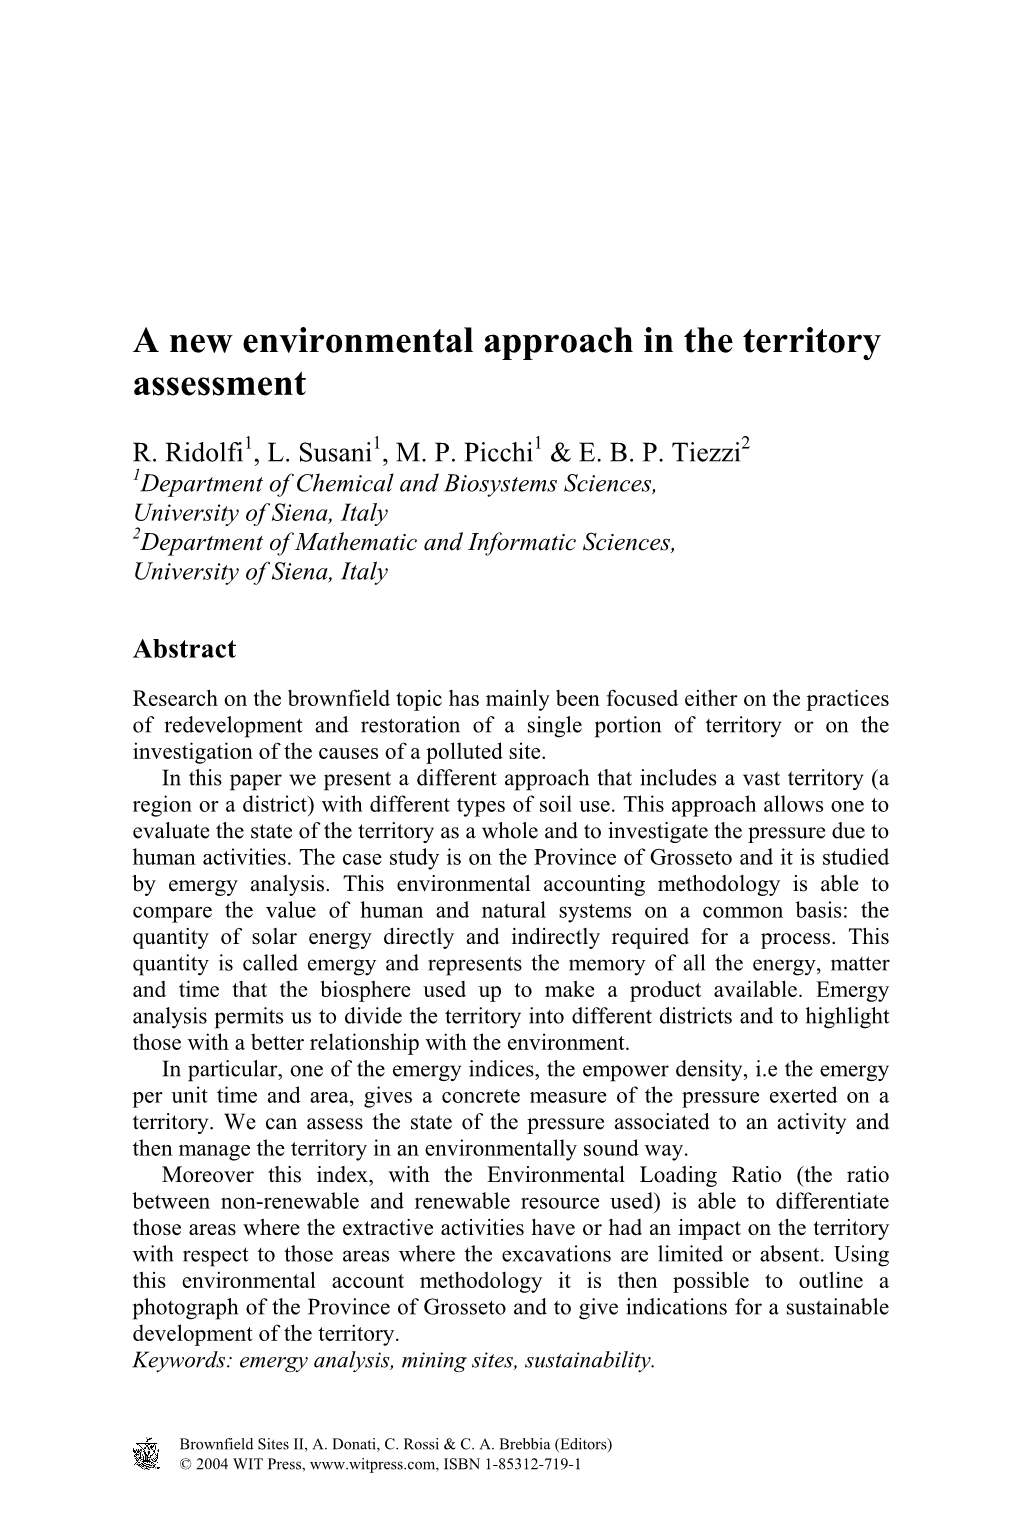 A New Environmental Approach in the Territory Assessment